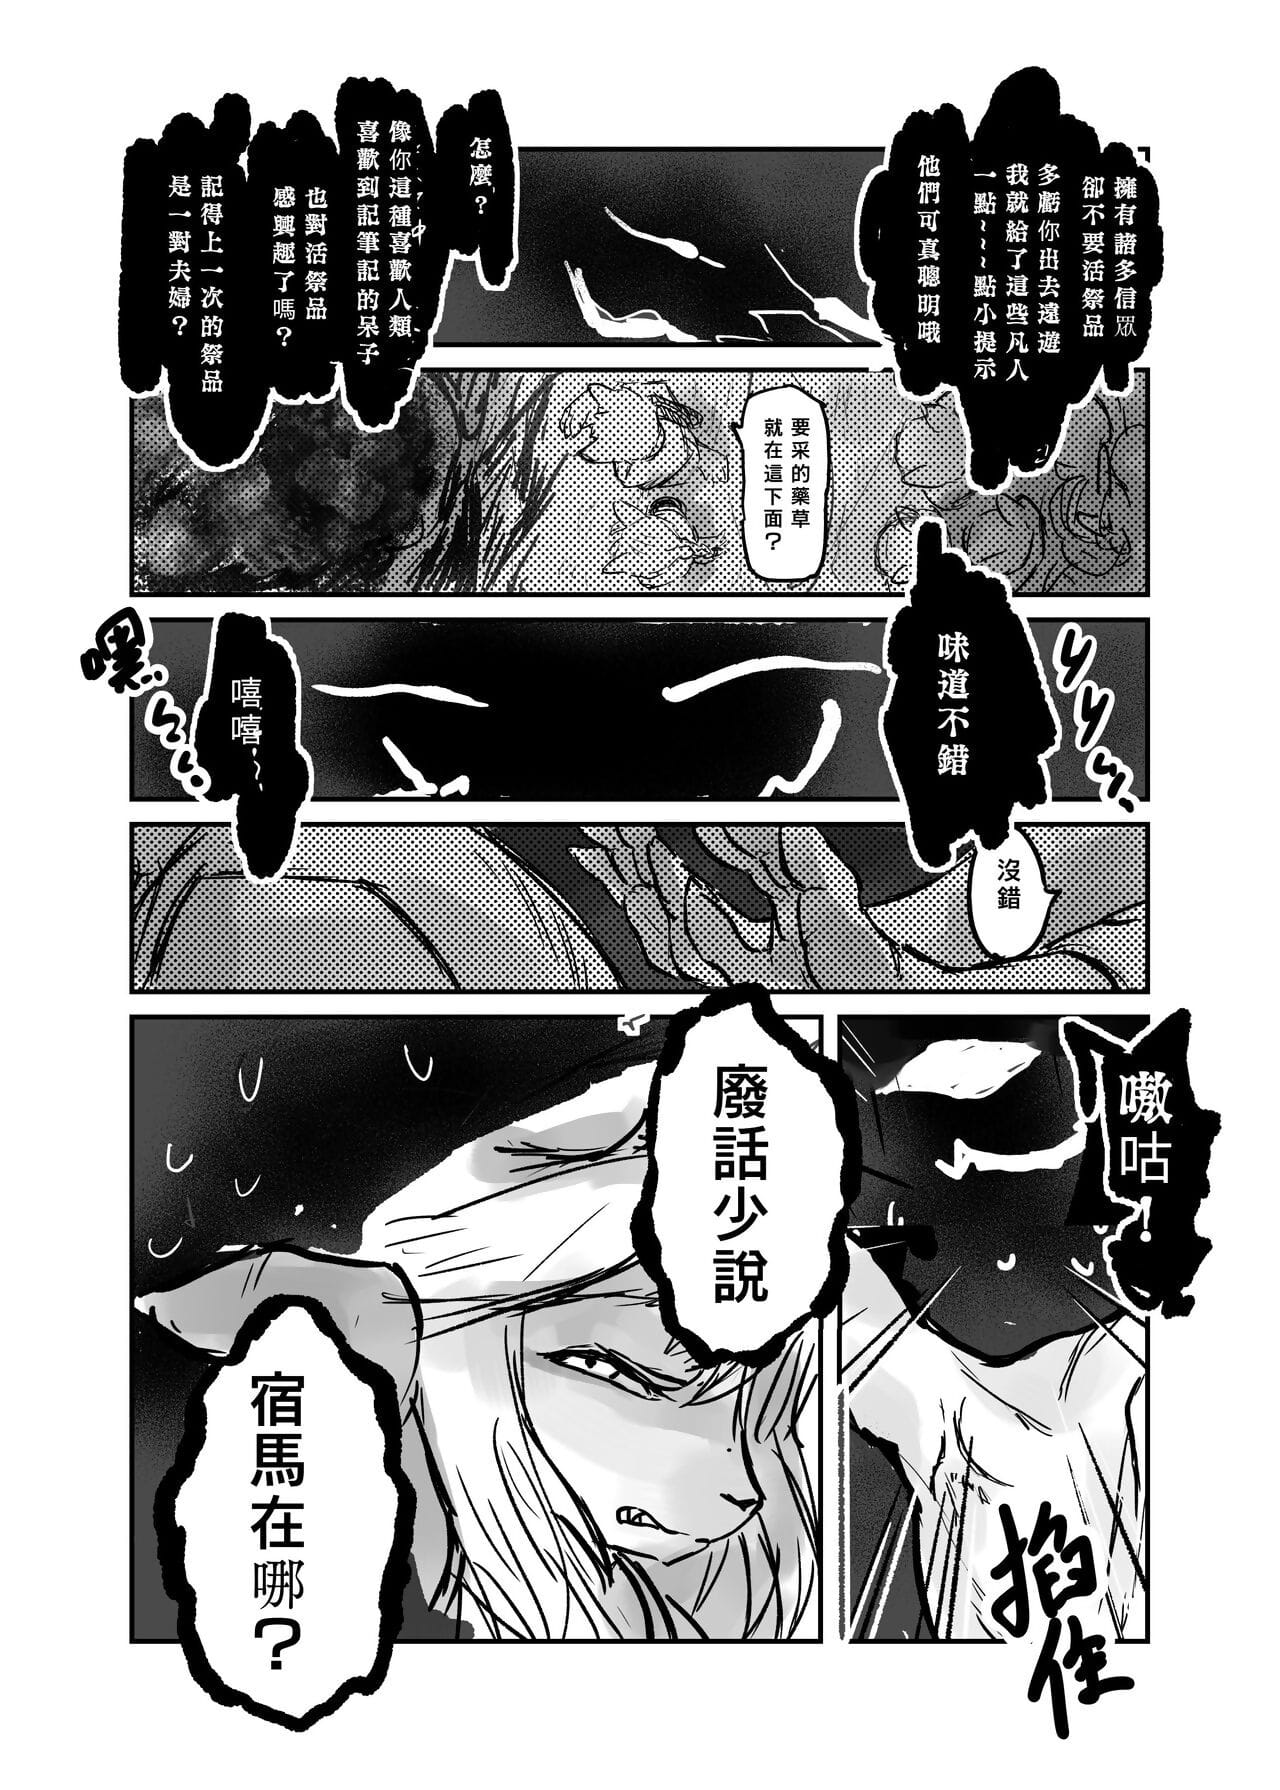 （the visitante 他乡之人 by：鬼流 Parte 3 page 1